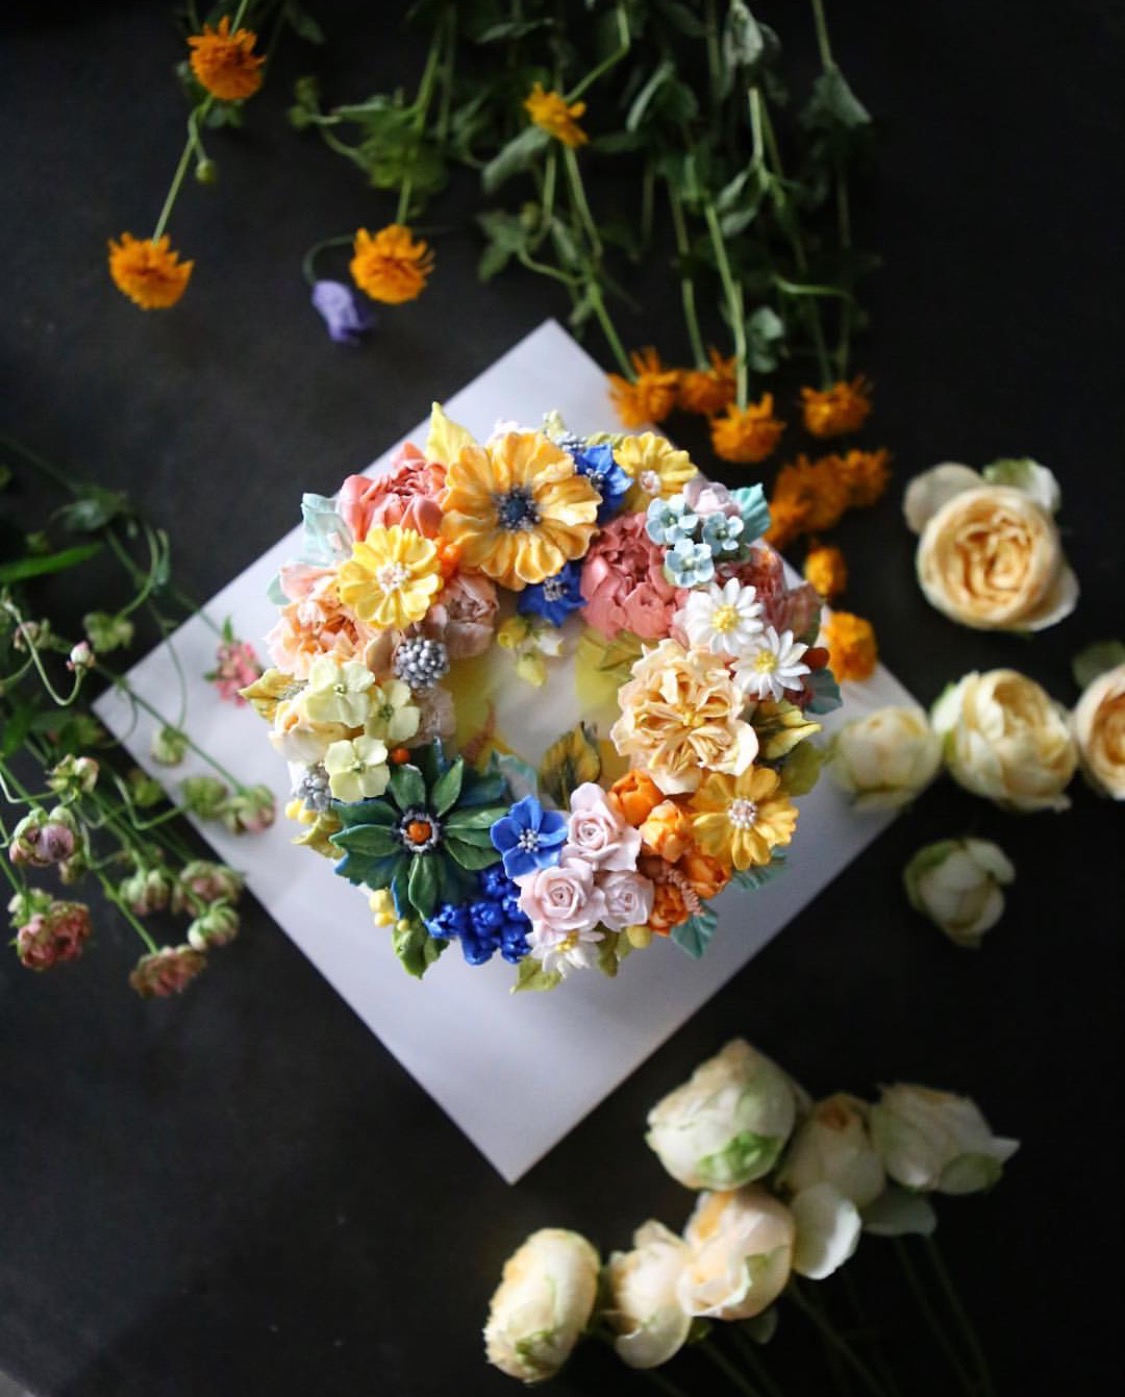 These flower cakes will blow your mind away